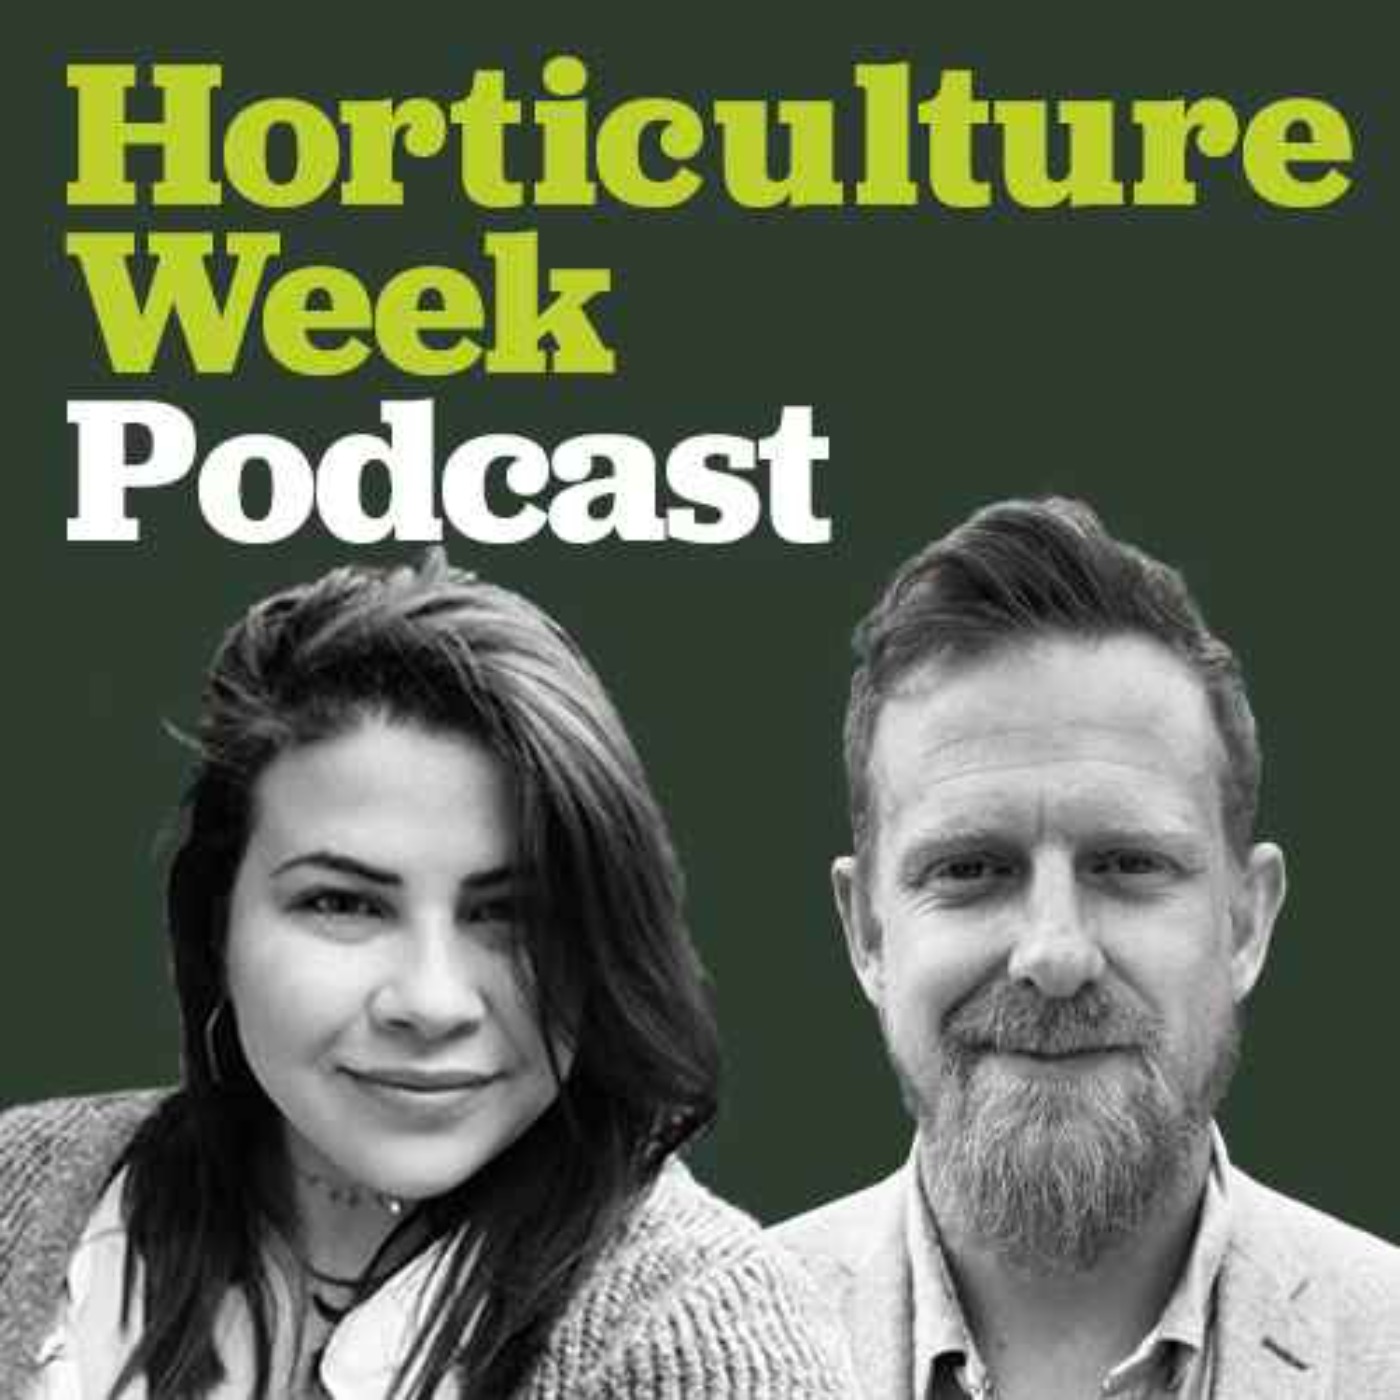 From elite football to elite horticulture - ambition and high standards with Creepers' Michael Buck